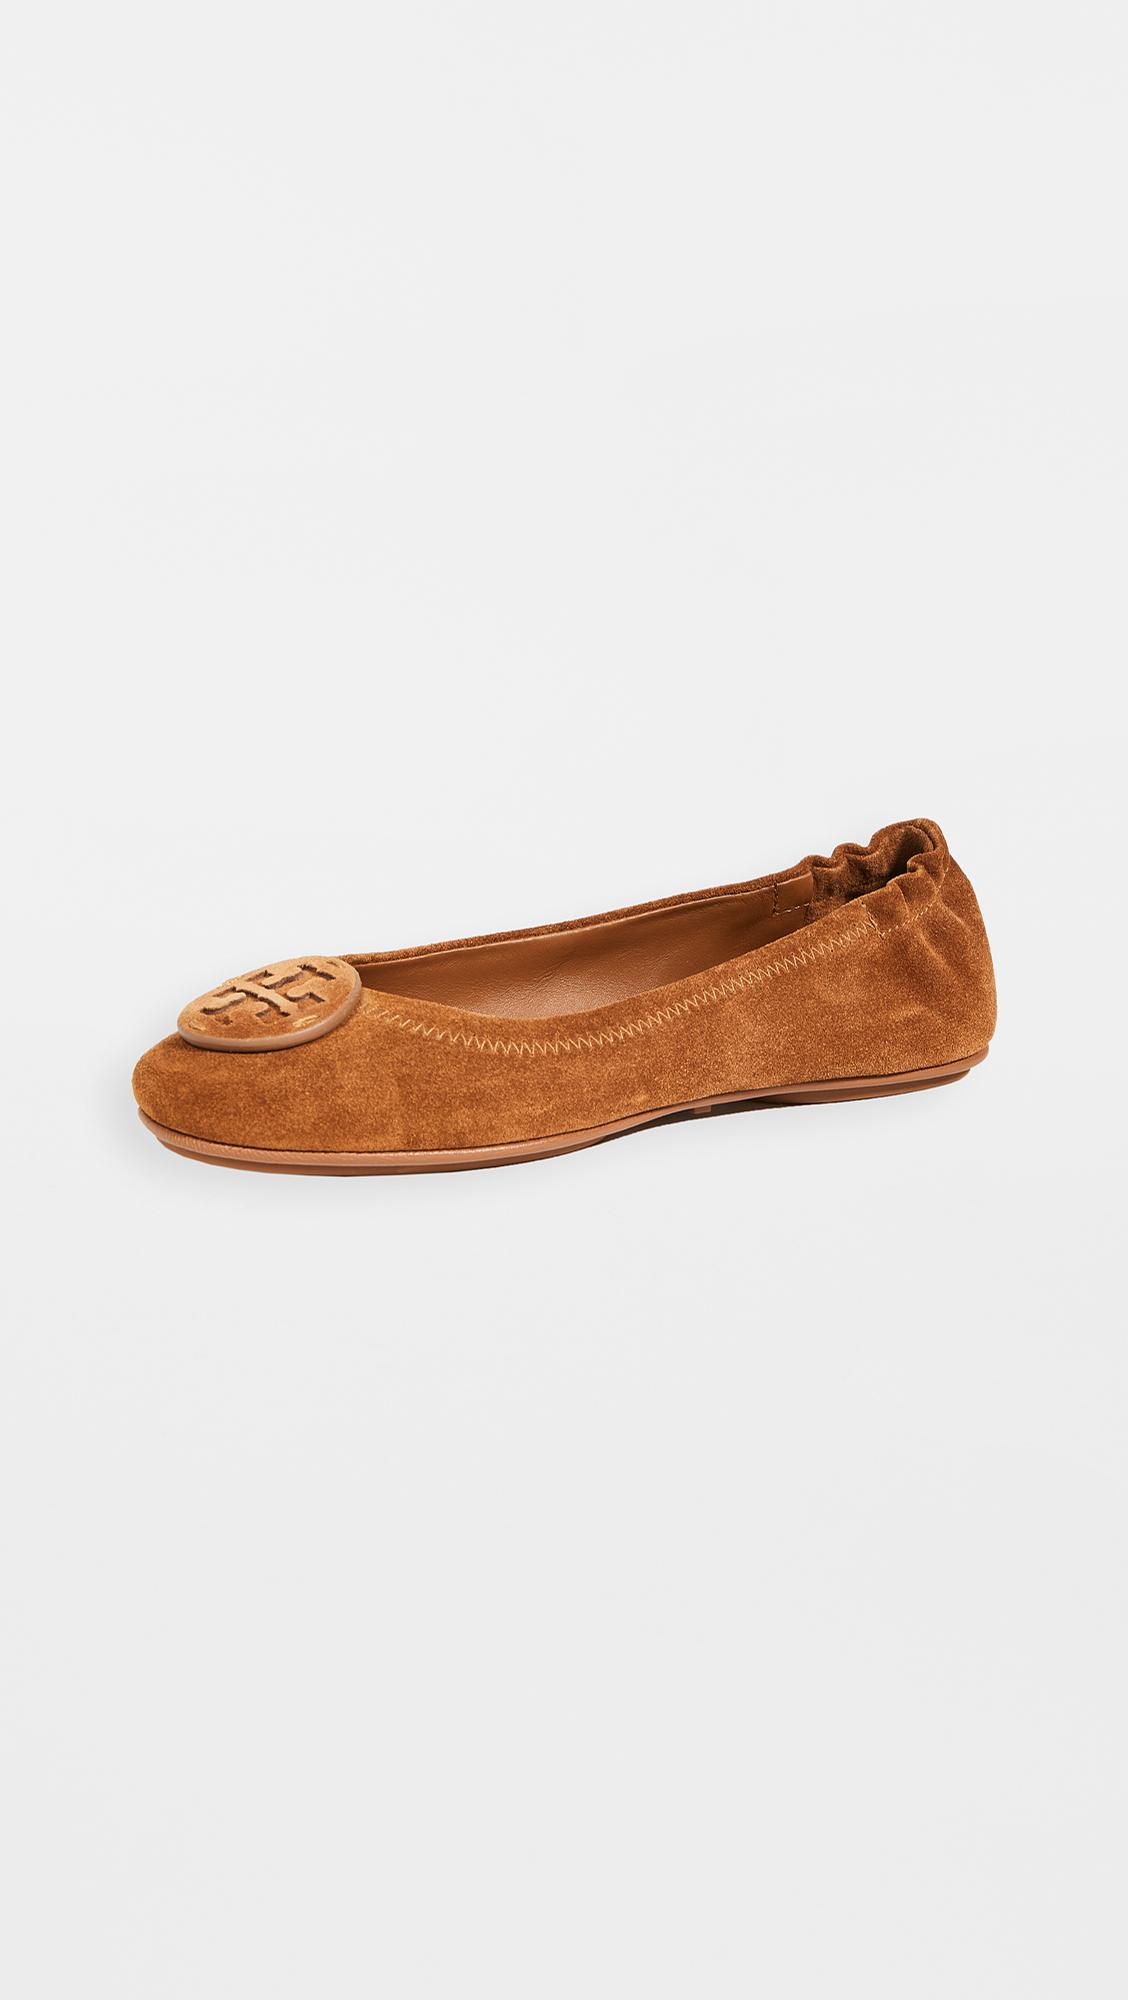 Tory Burch Suede Minnie Travel Ballet Flats in Brown - Lyst